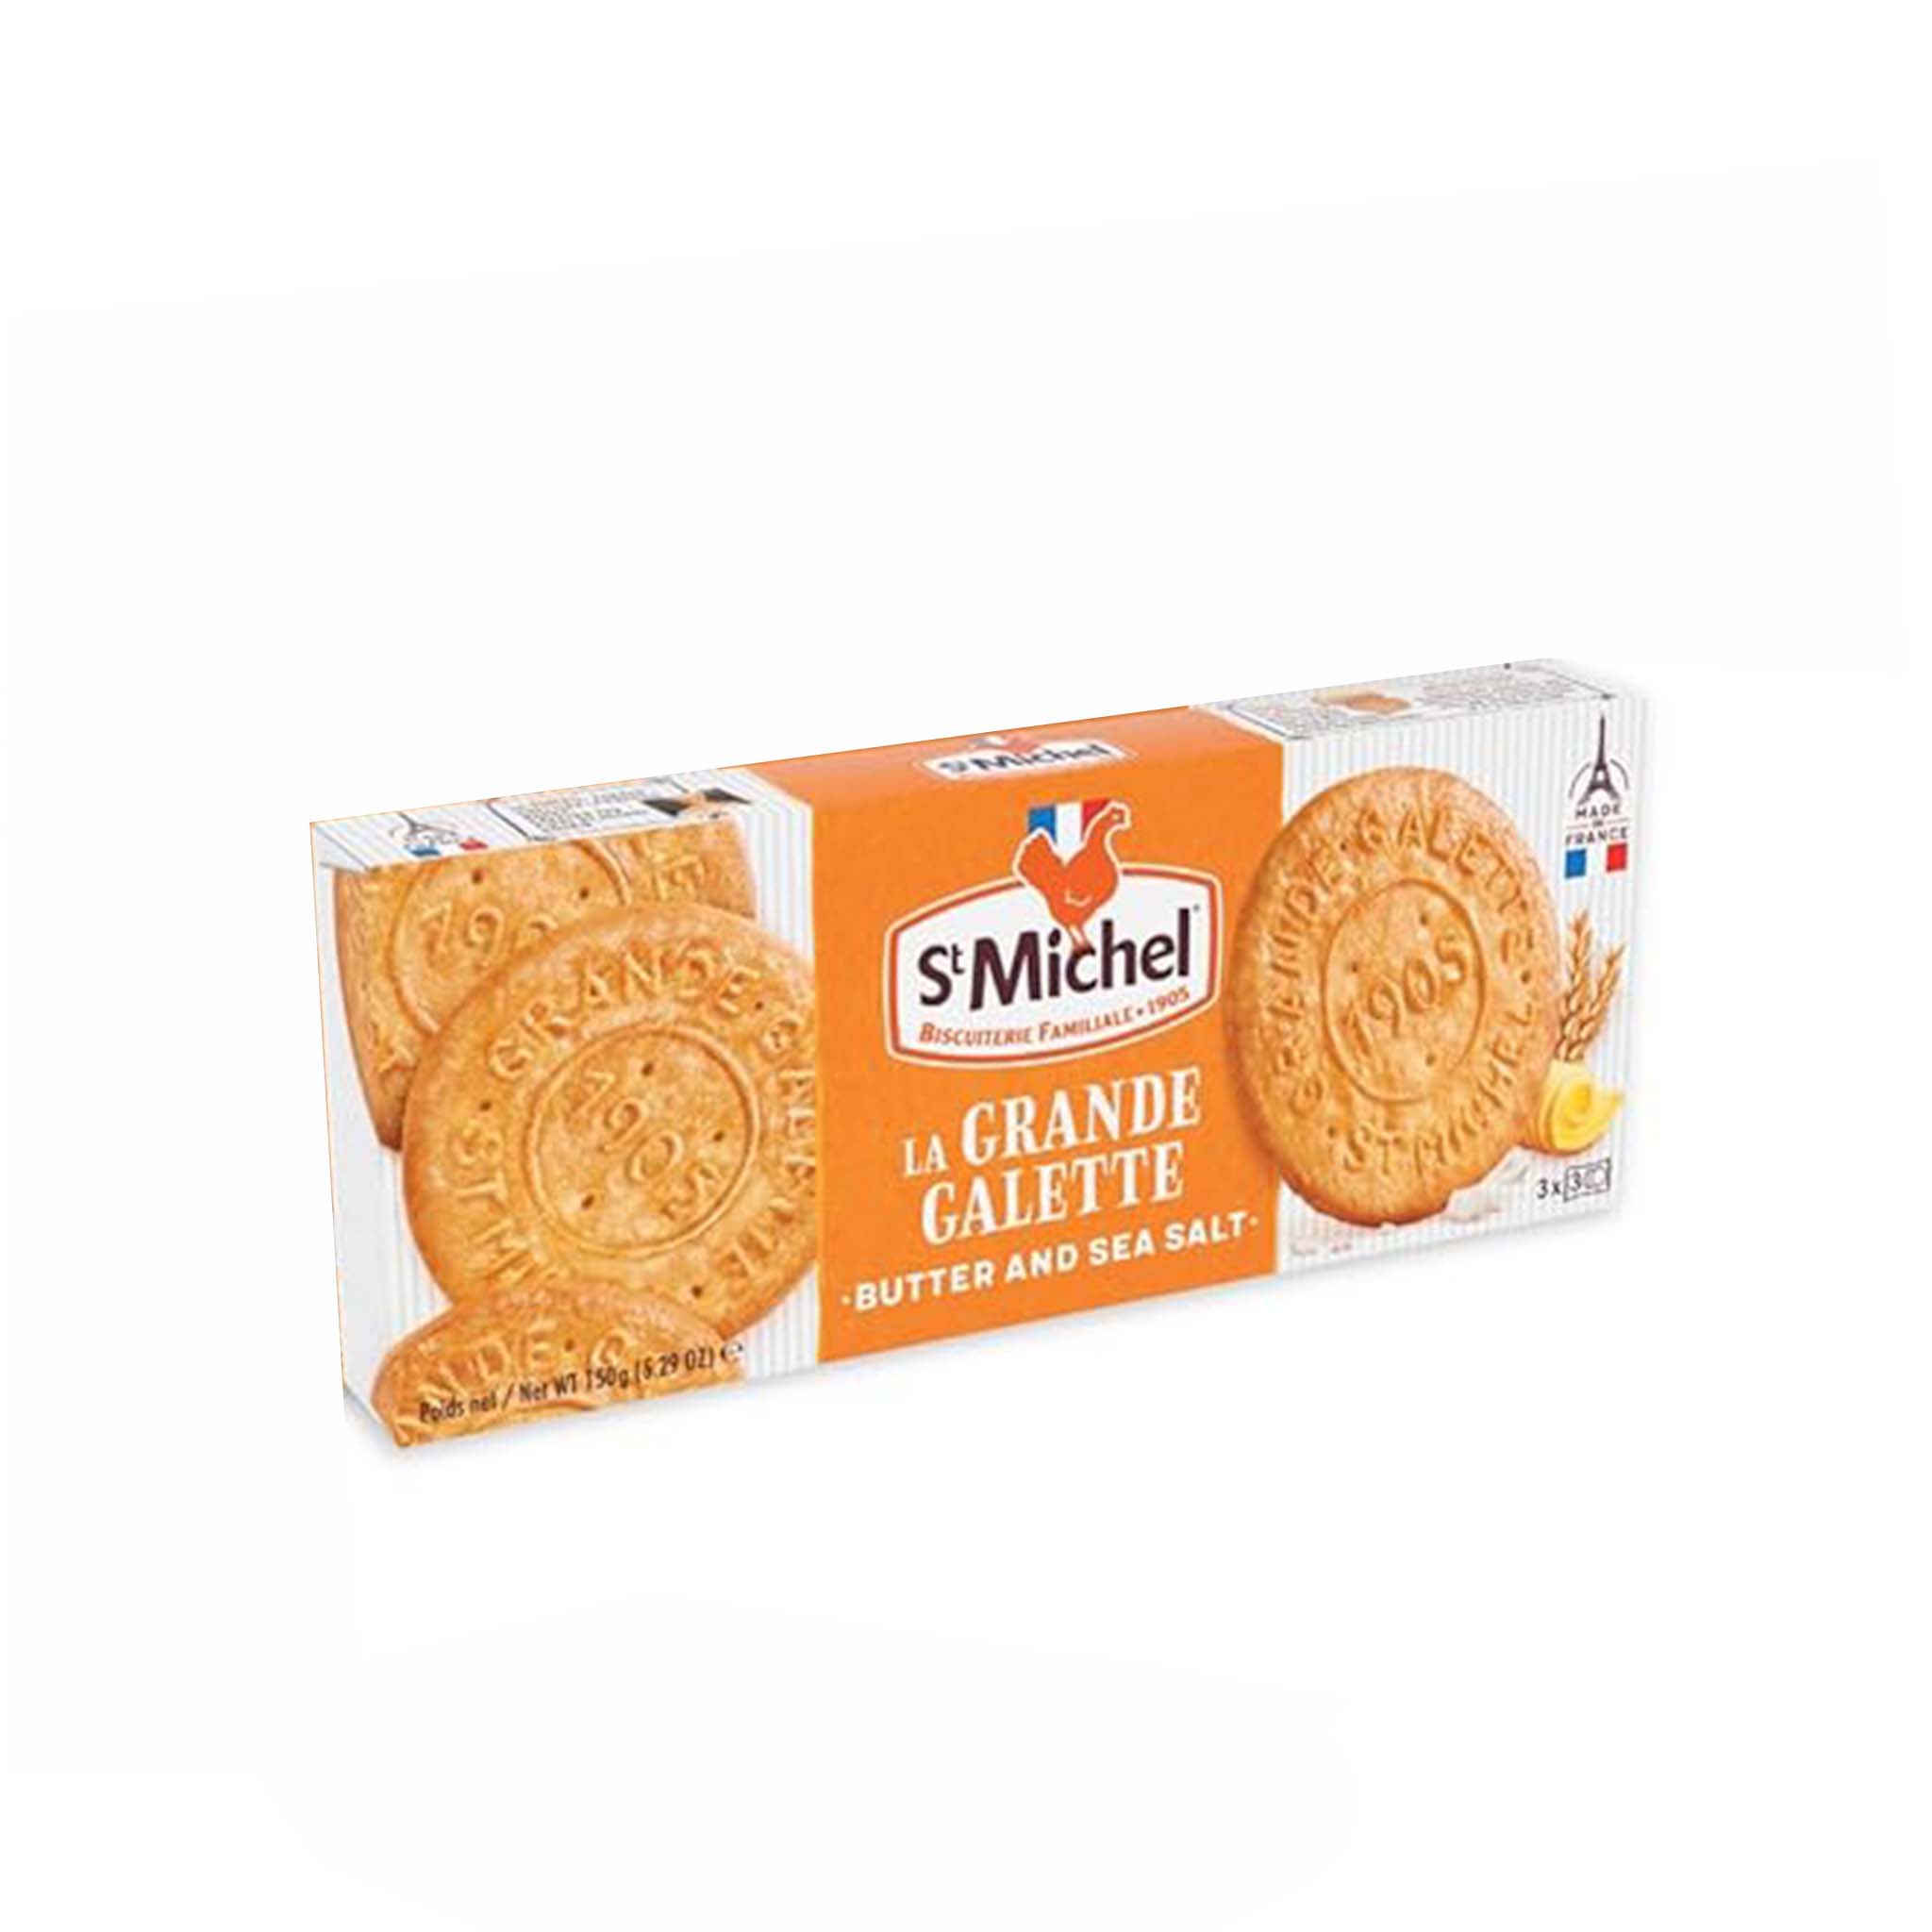 ST MICHEL GRANDES GALETTES WITH BUTTER & SEA SALT 150g